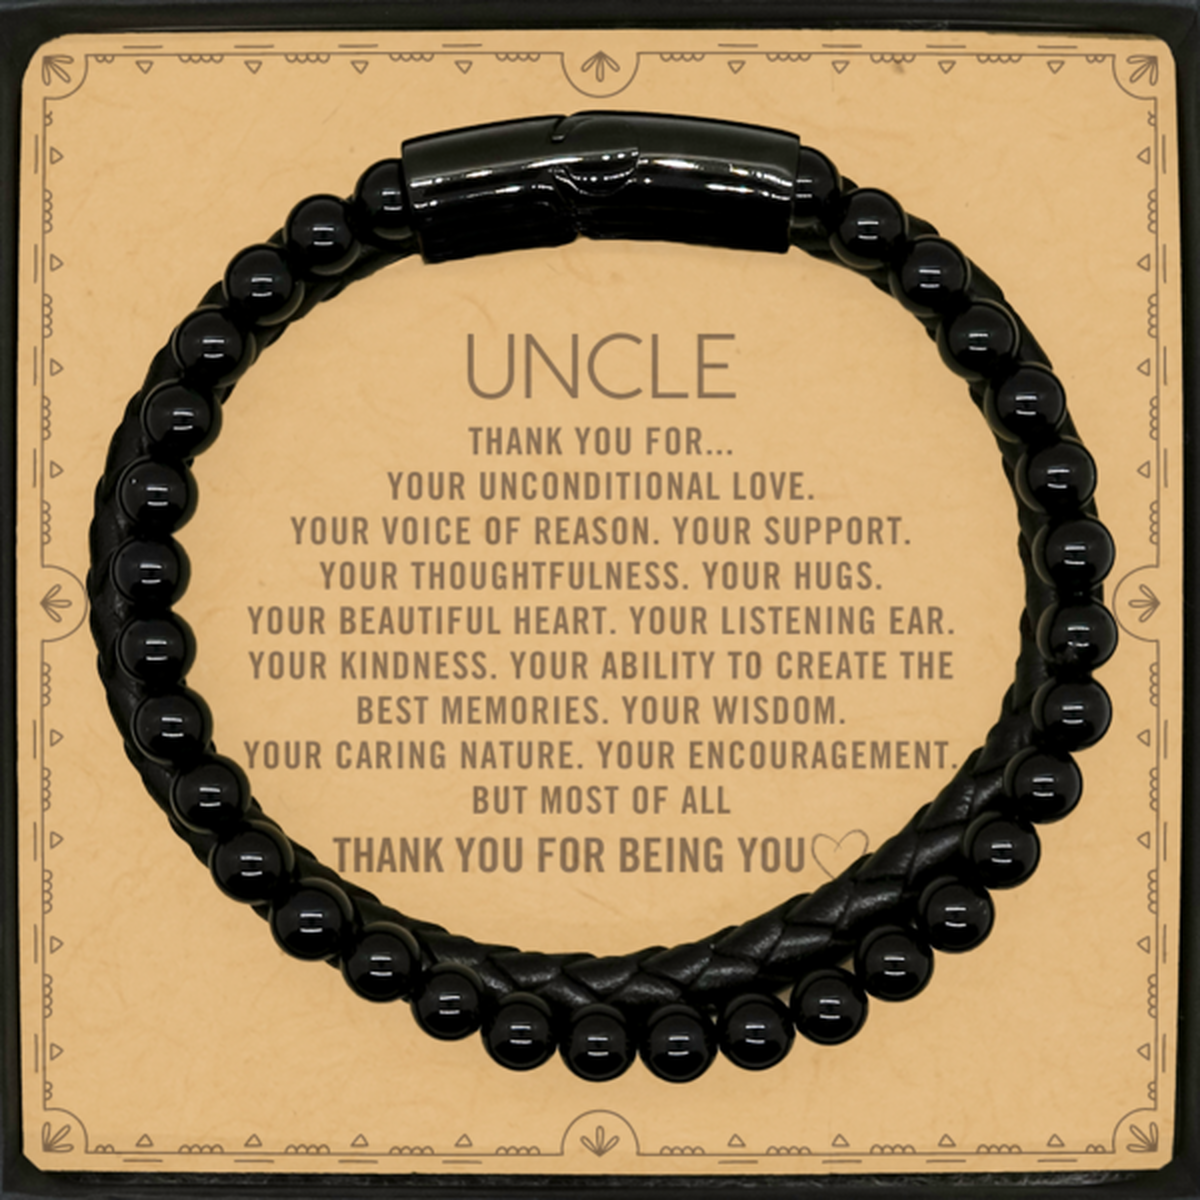 Uncle Stone Leather Bracelets Custom, Message Card Gifts For Uncle Christmas Graduation Birthday Gifts for Men Women Uncle Thank you for Your unconditional love